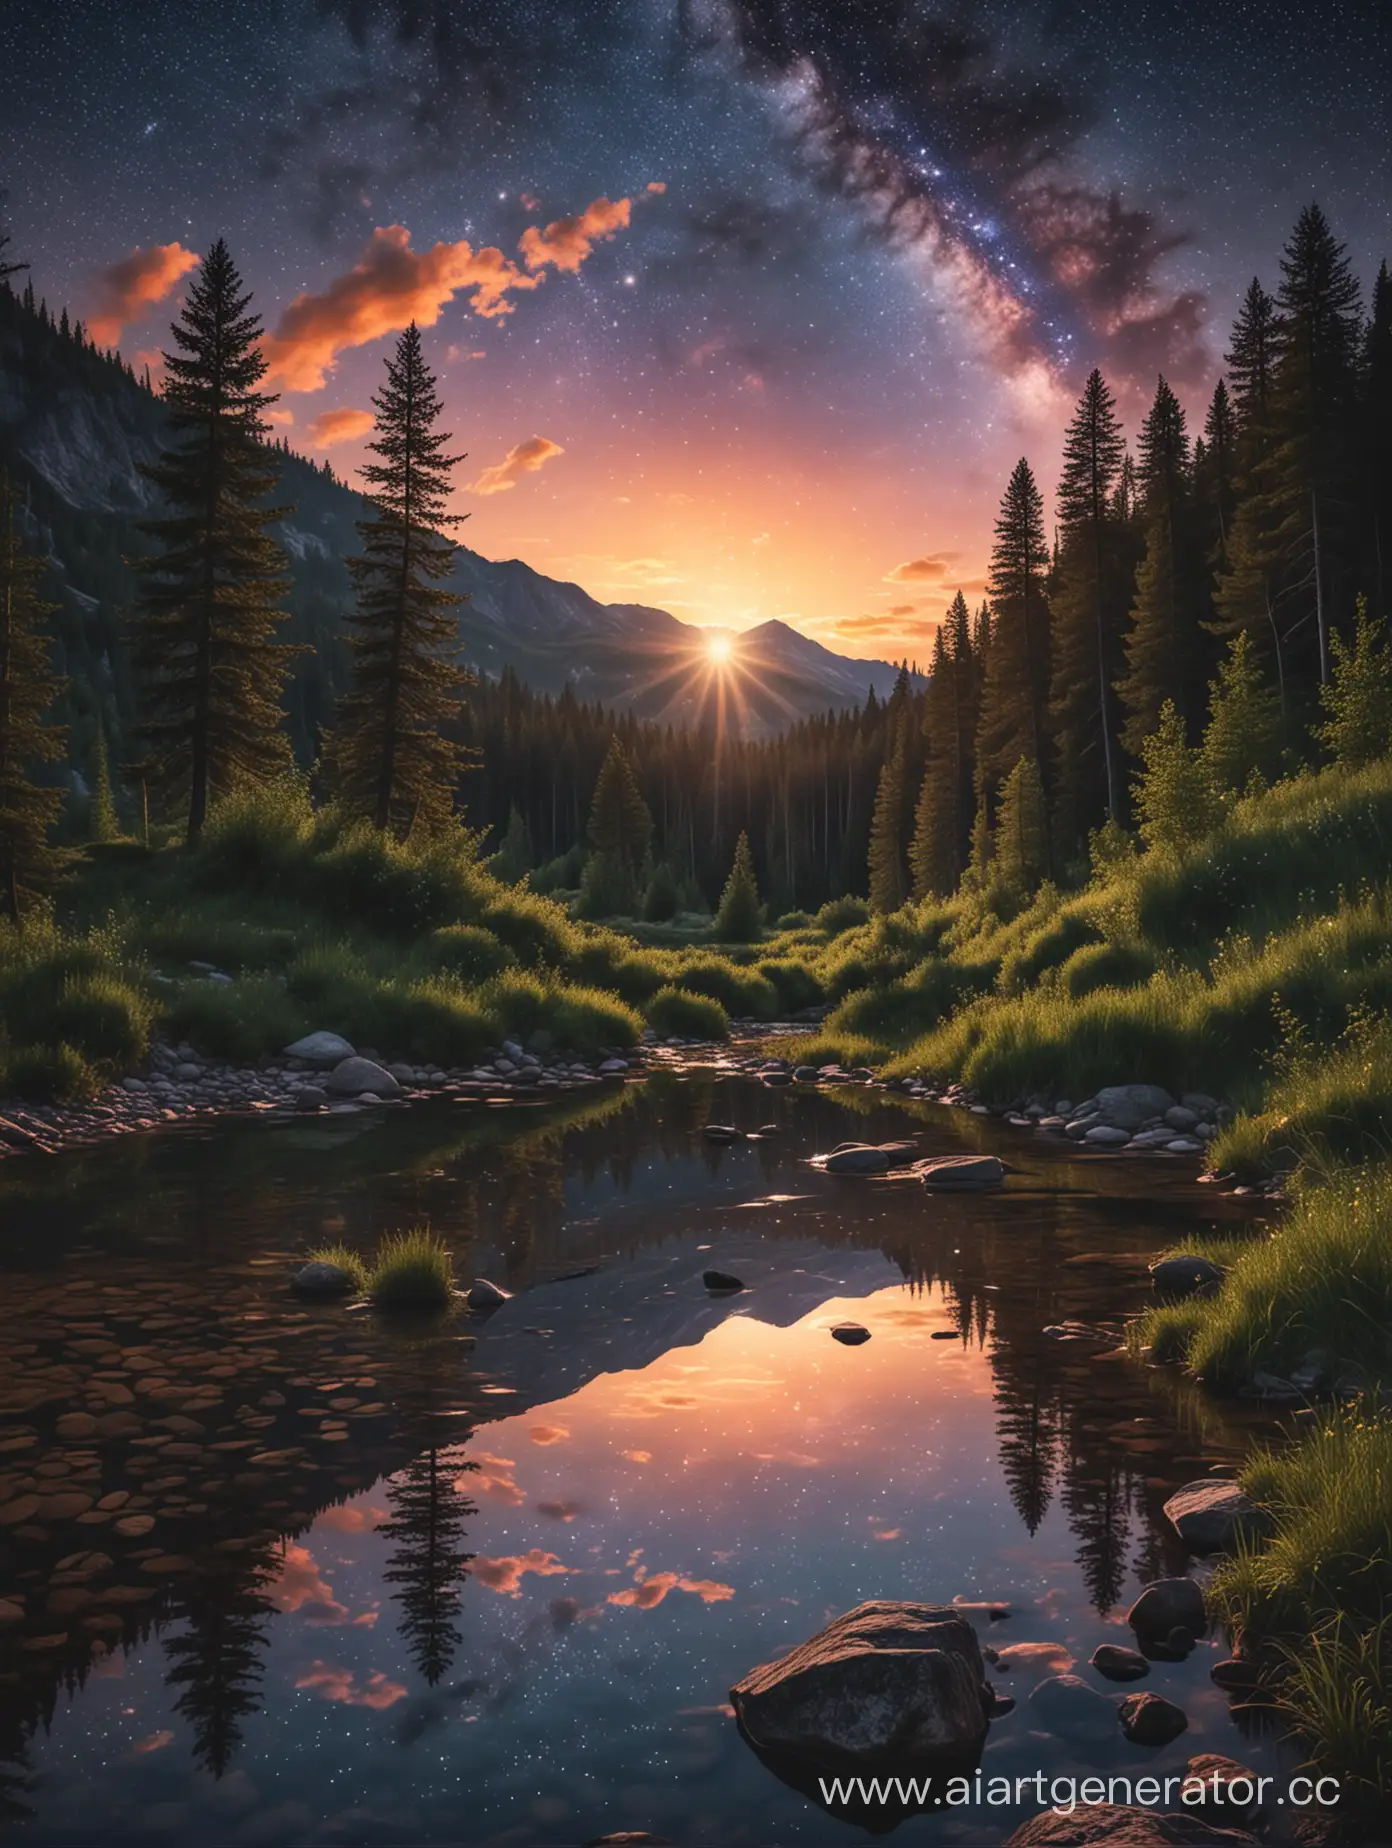 Sunset-Serenity-by-Mountain-River-in-a-Starry-Glade